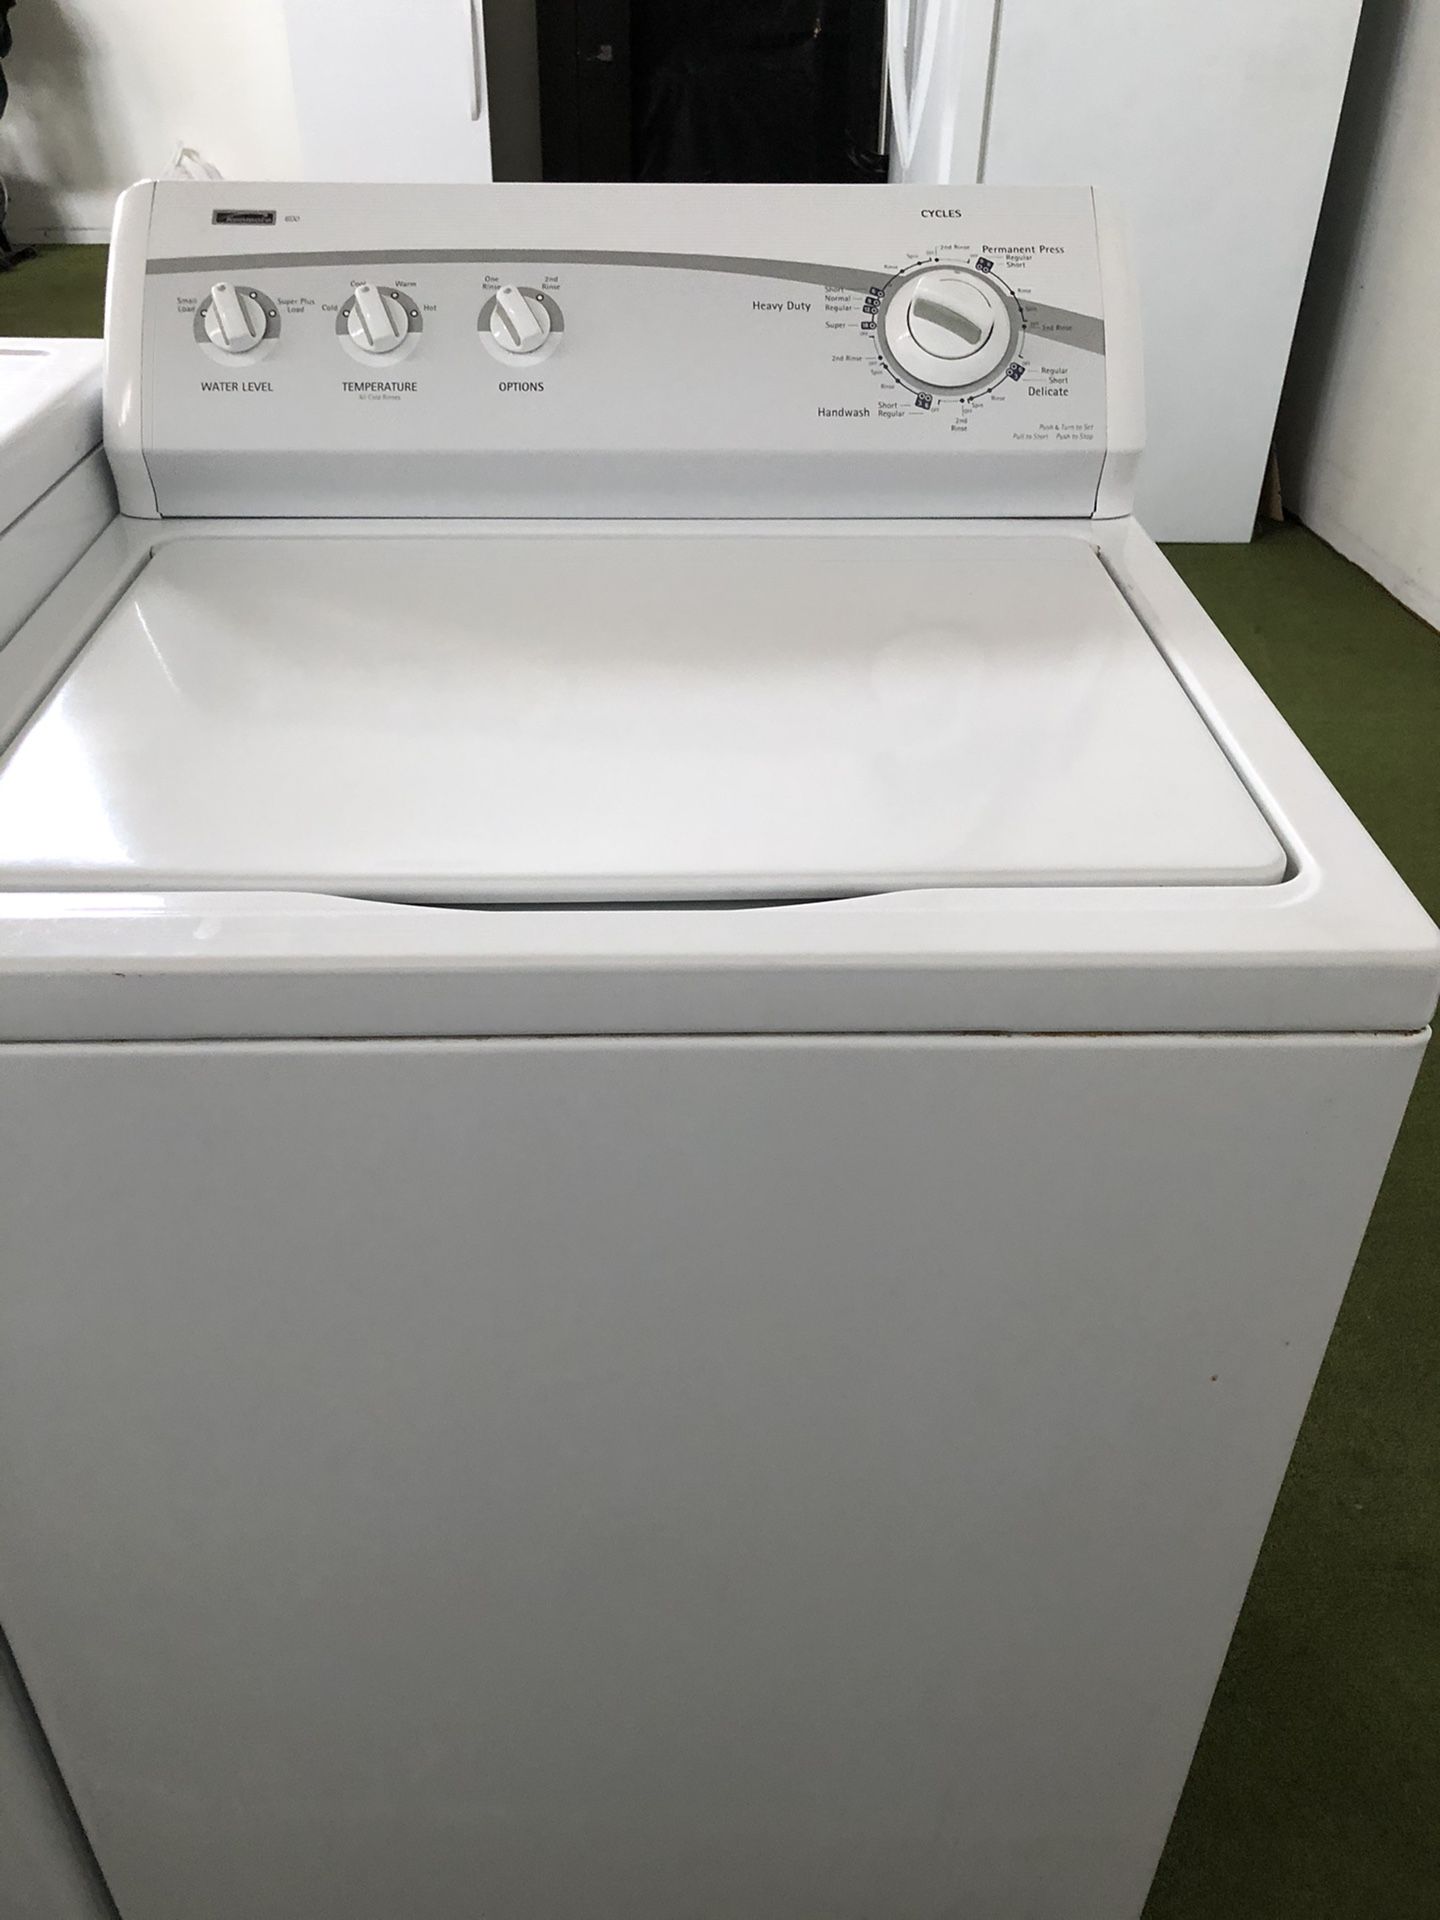 Kenmore washer top load very nice condition